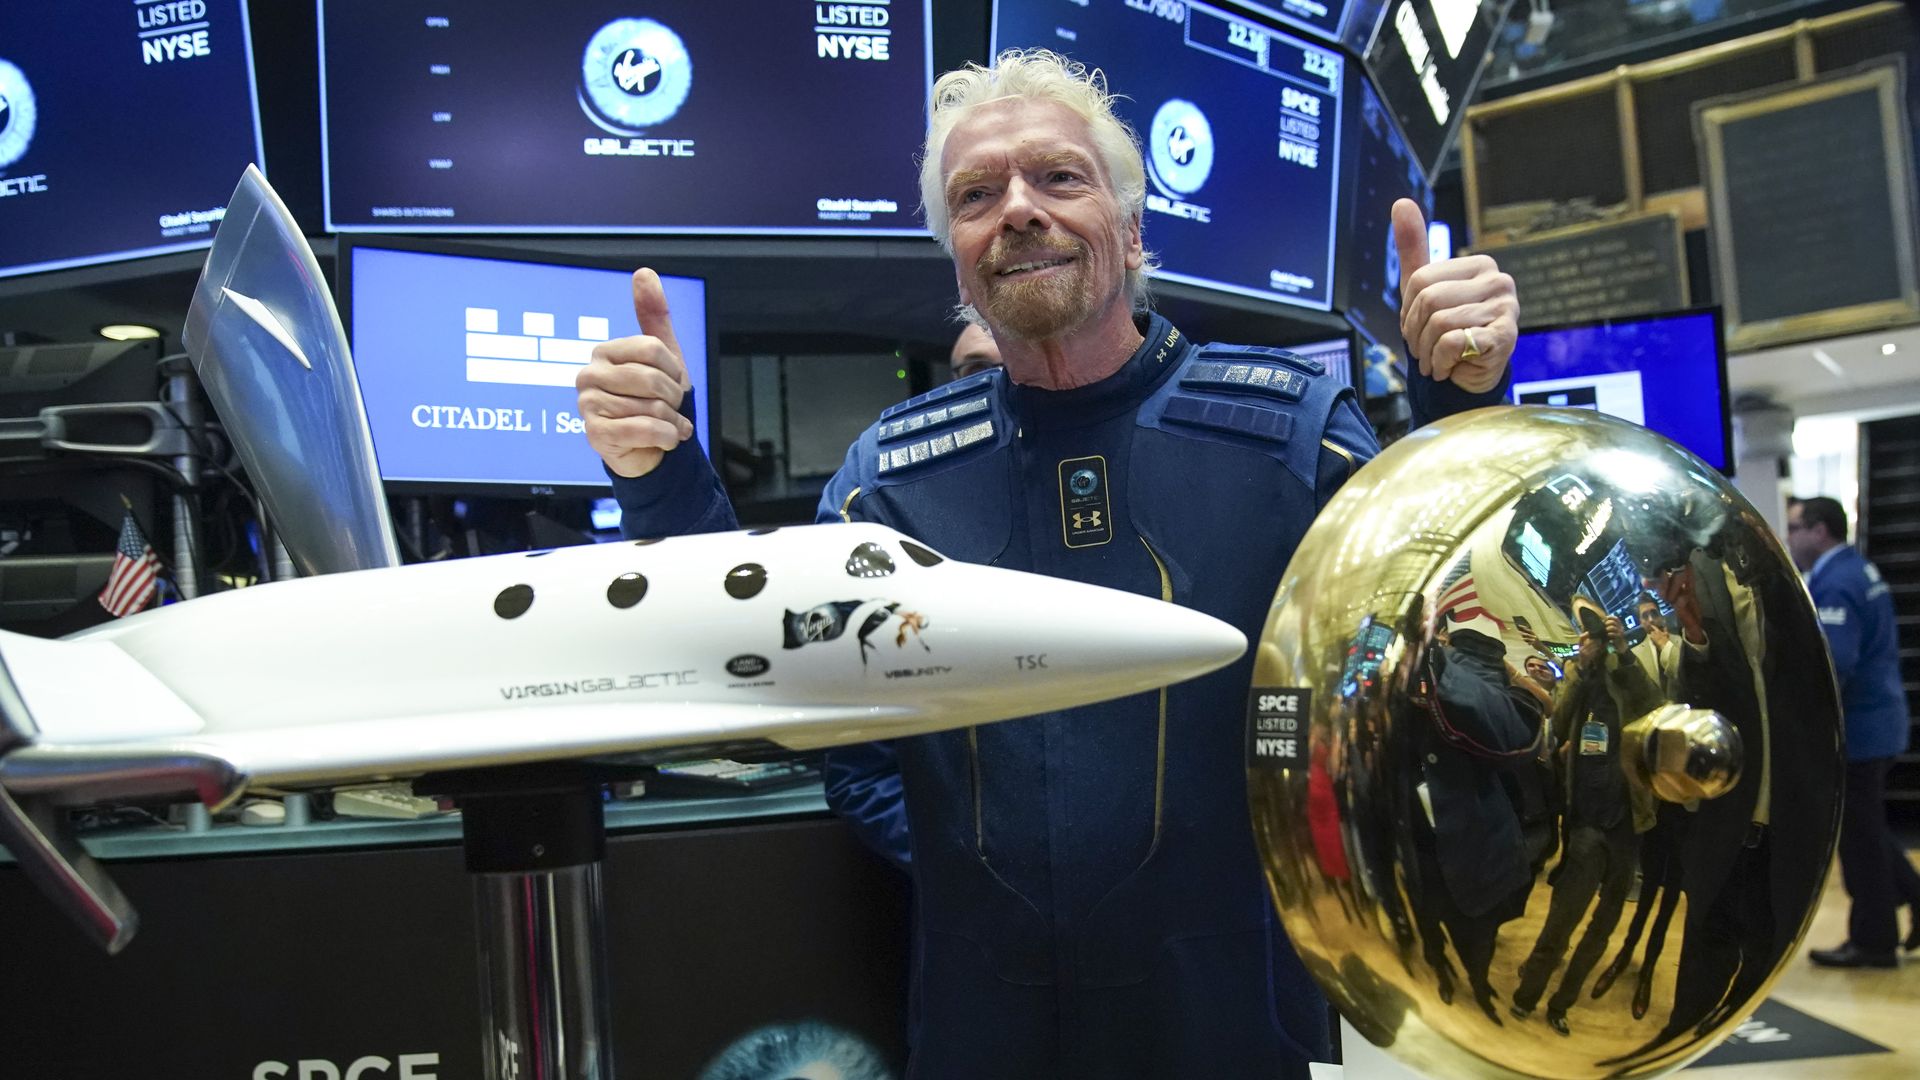 Sir Richard Branson in front of a model Virgin Galactic rocket and a globe